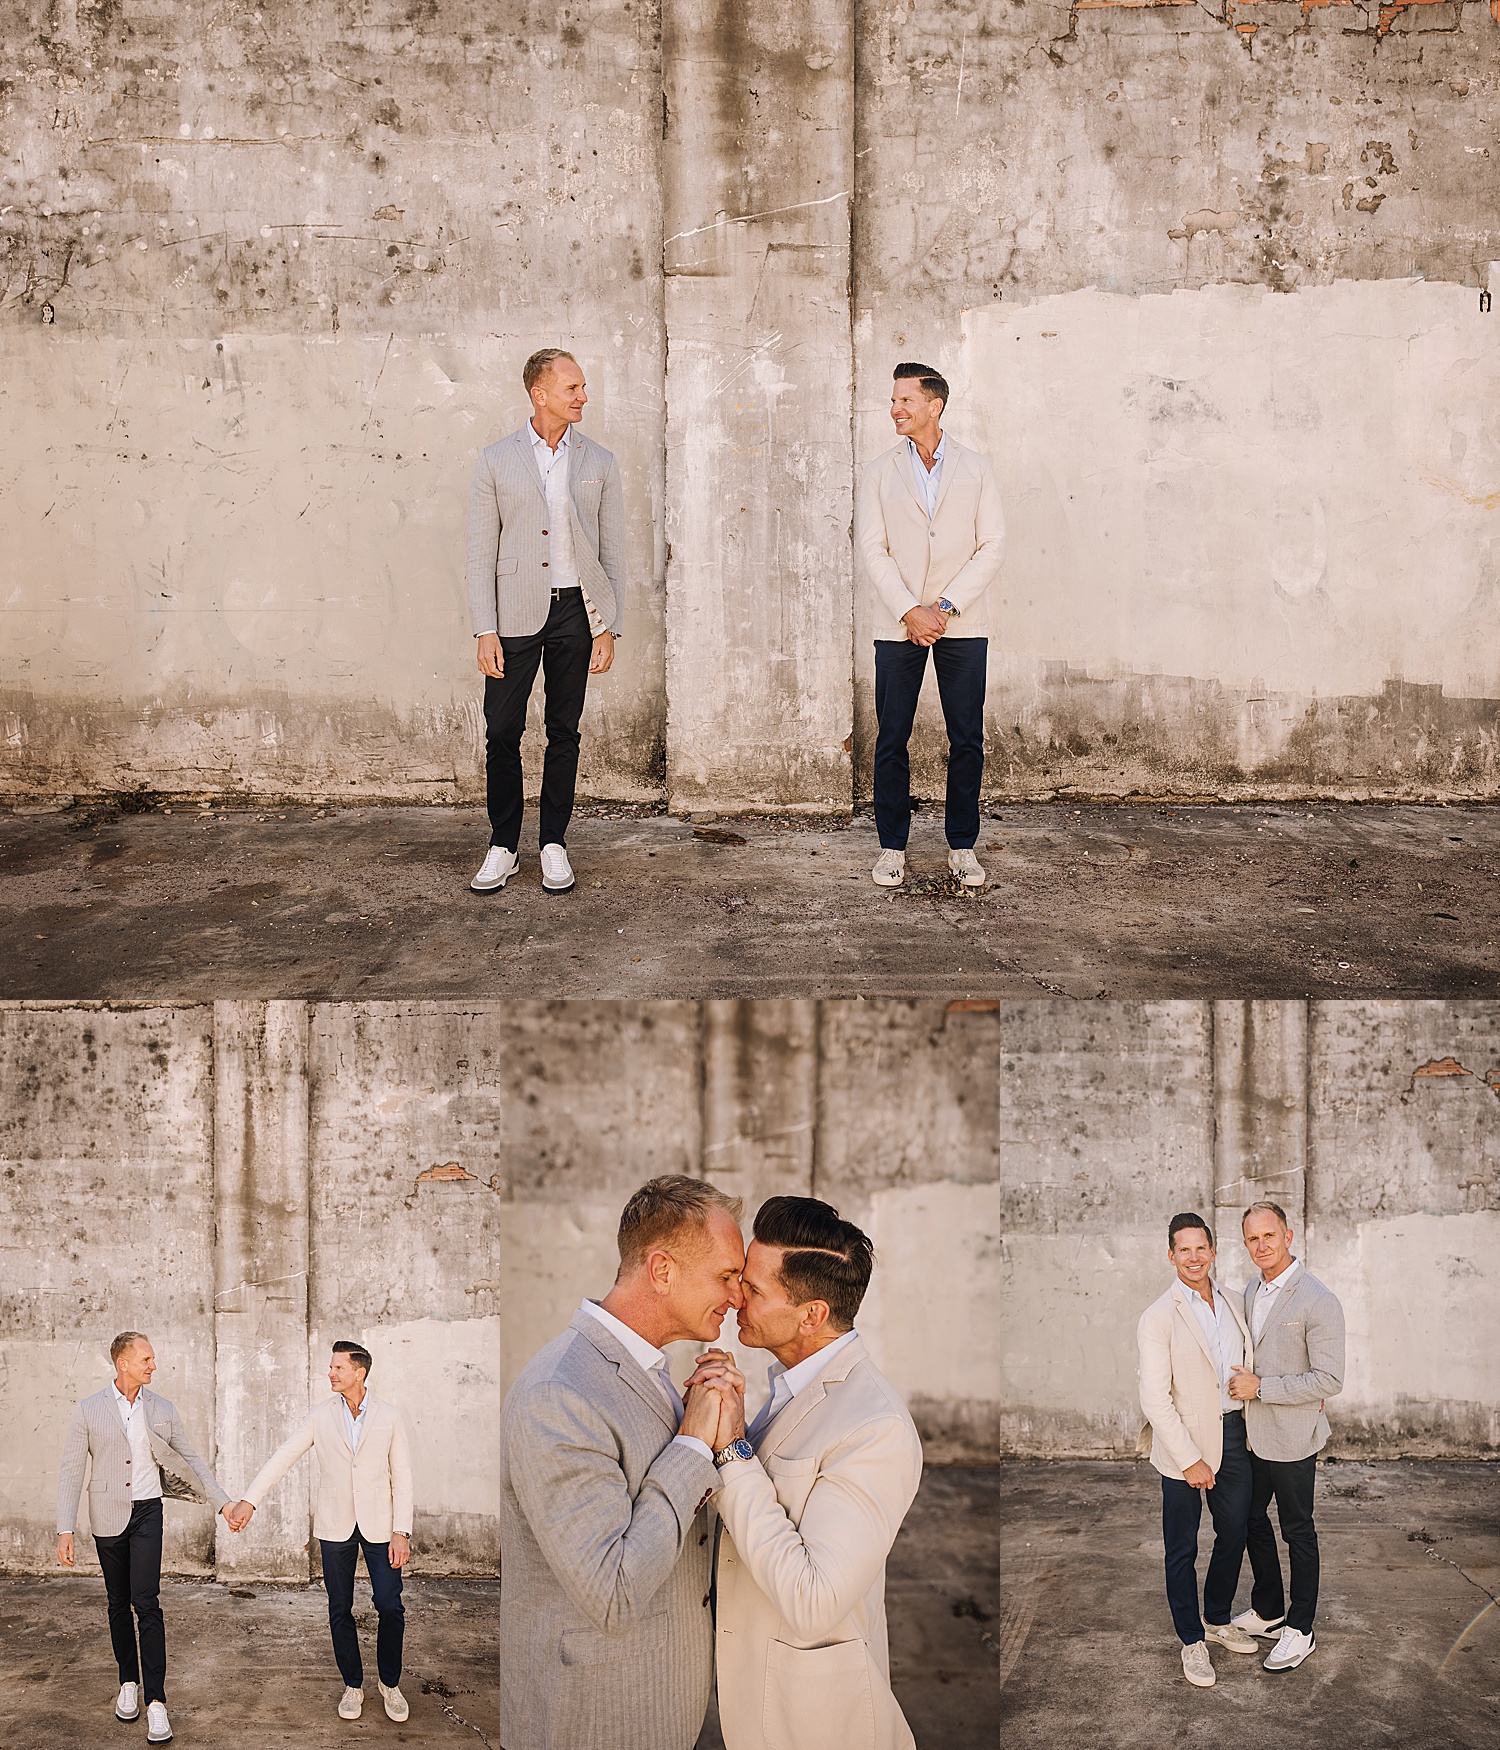 Newly married men get intimate while holding hands after intimate courthouse wedding